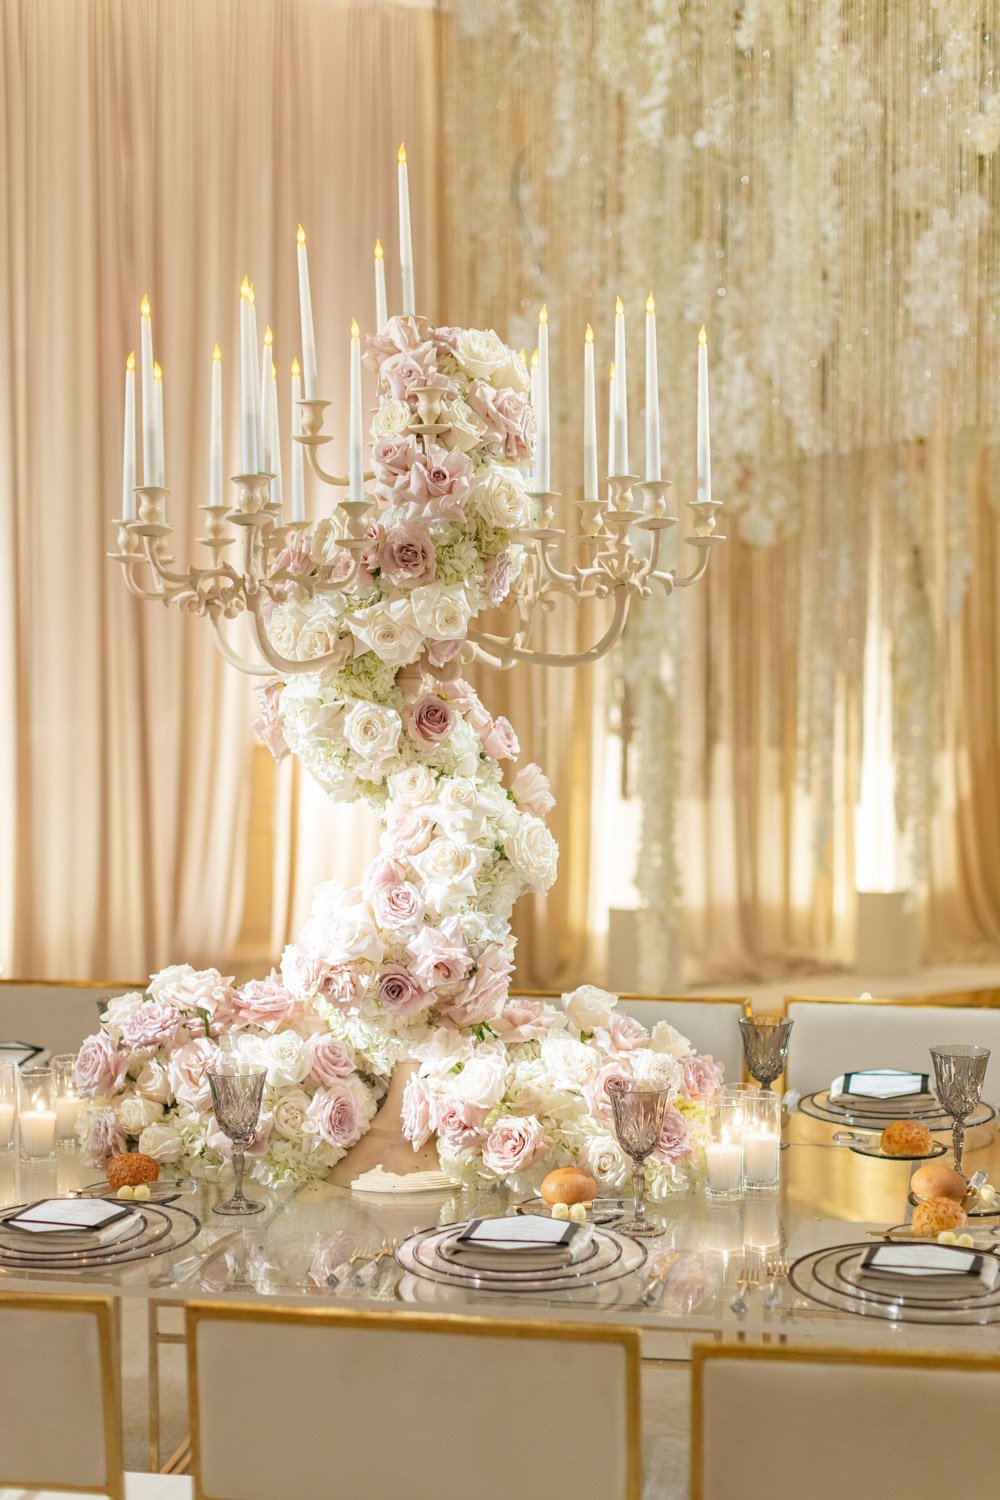 Pale pink and cream rose tall table centerpieces highlight candlelit crystal and gold accents at the Ritz-Carlton Laguna Niguel